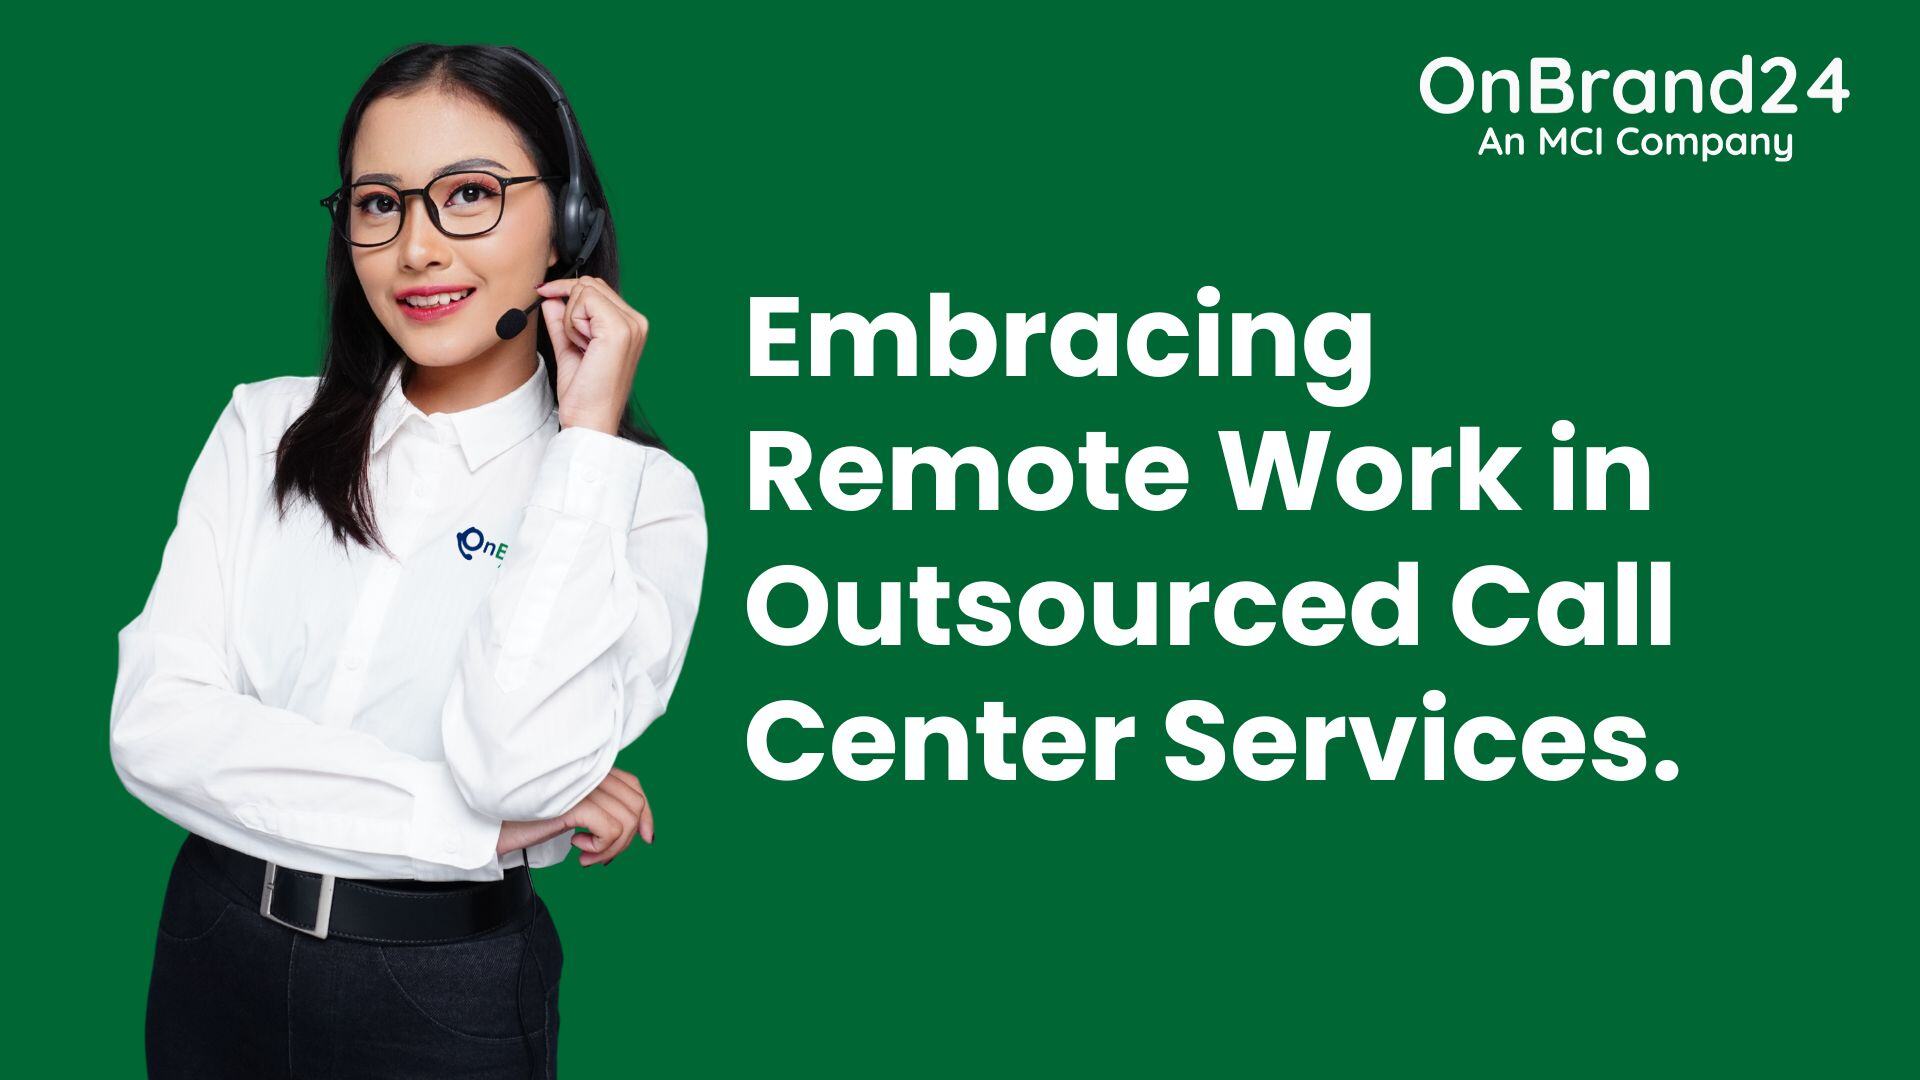 Embracing Remote Work in Outsourced Call Center Services - Featured Image